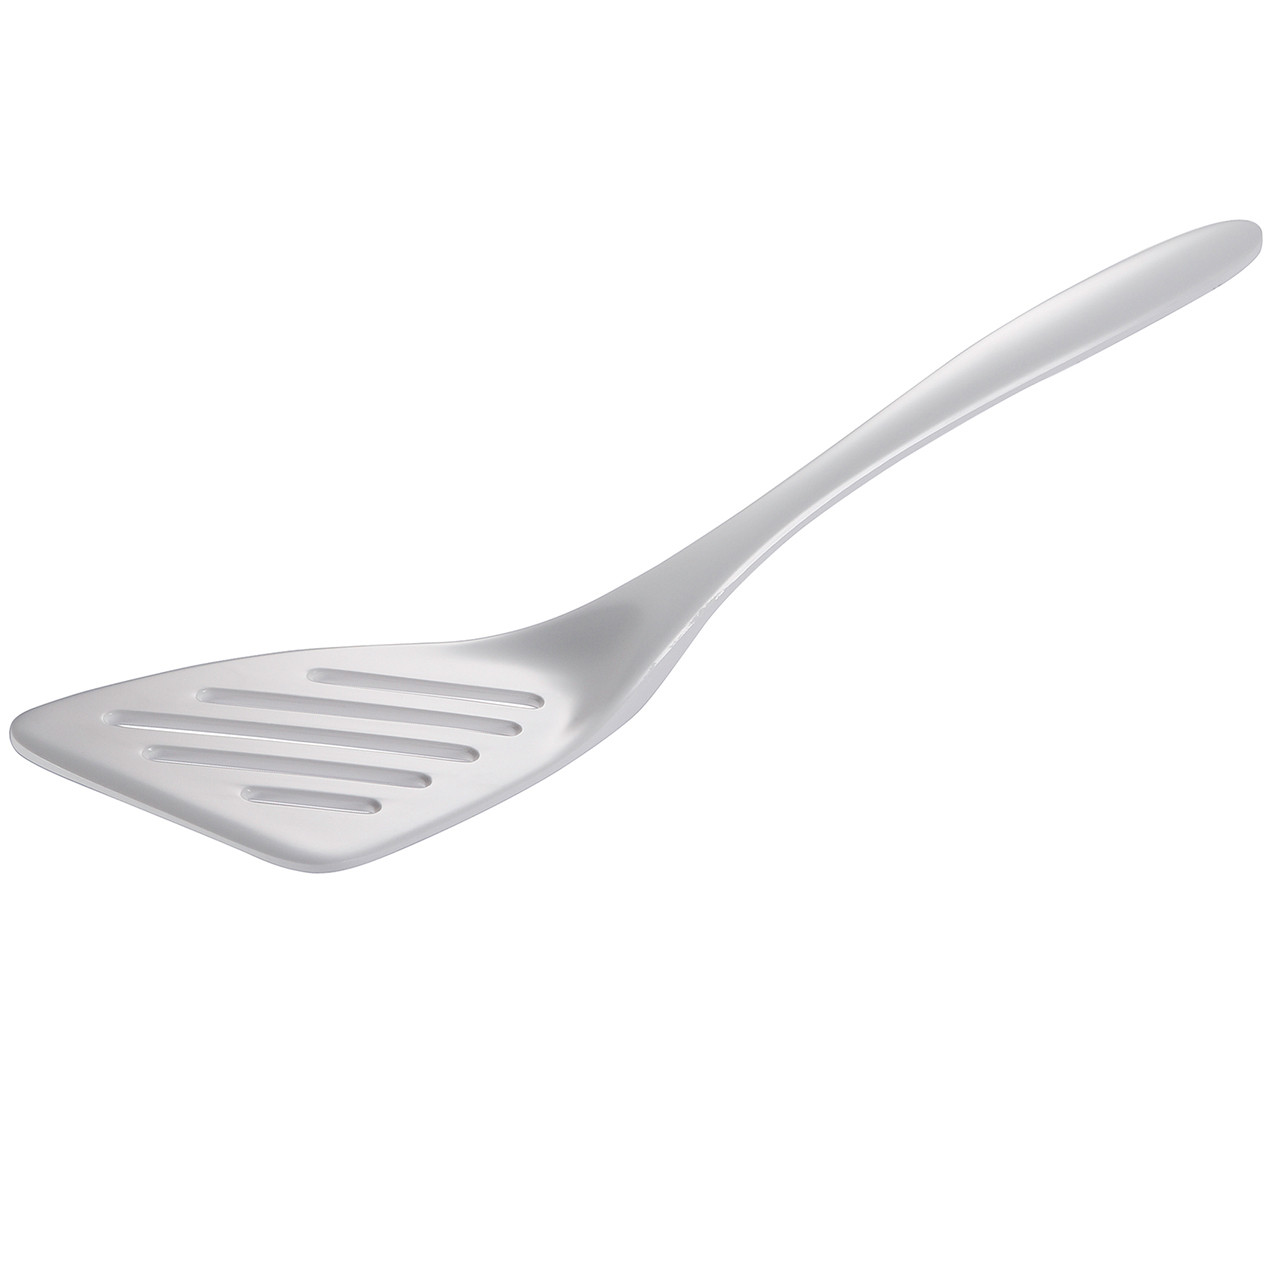 Slotted Turner | Kitchen Utensils by Cutco